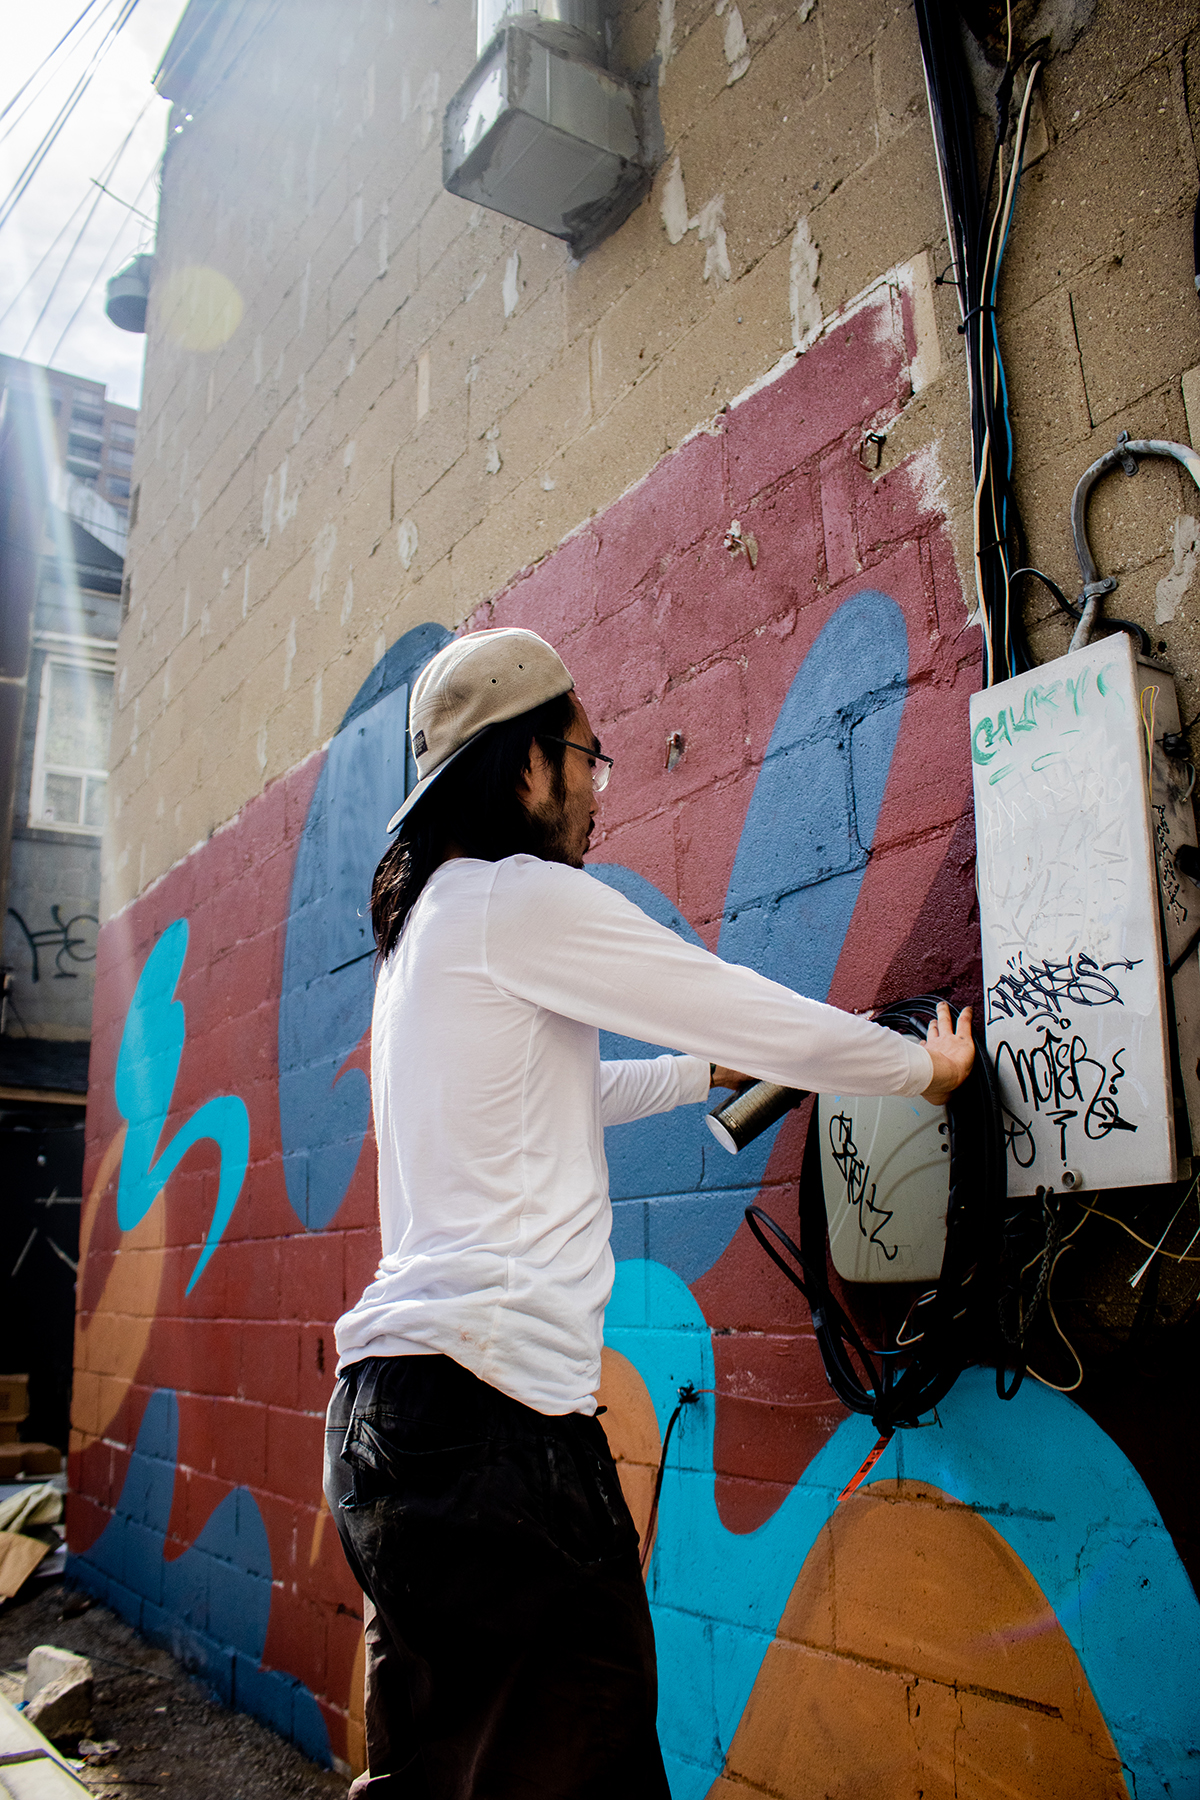 Photo of artist Andre Kan painting a geometric mural with red, blue and orange colours, he is wearing a white shirt and black pants